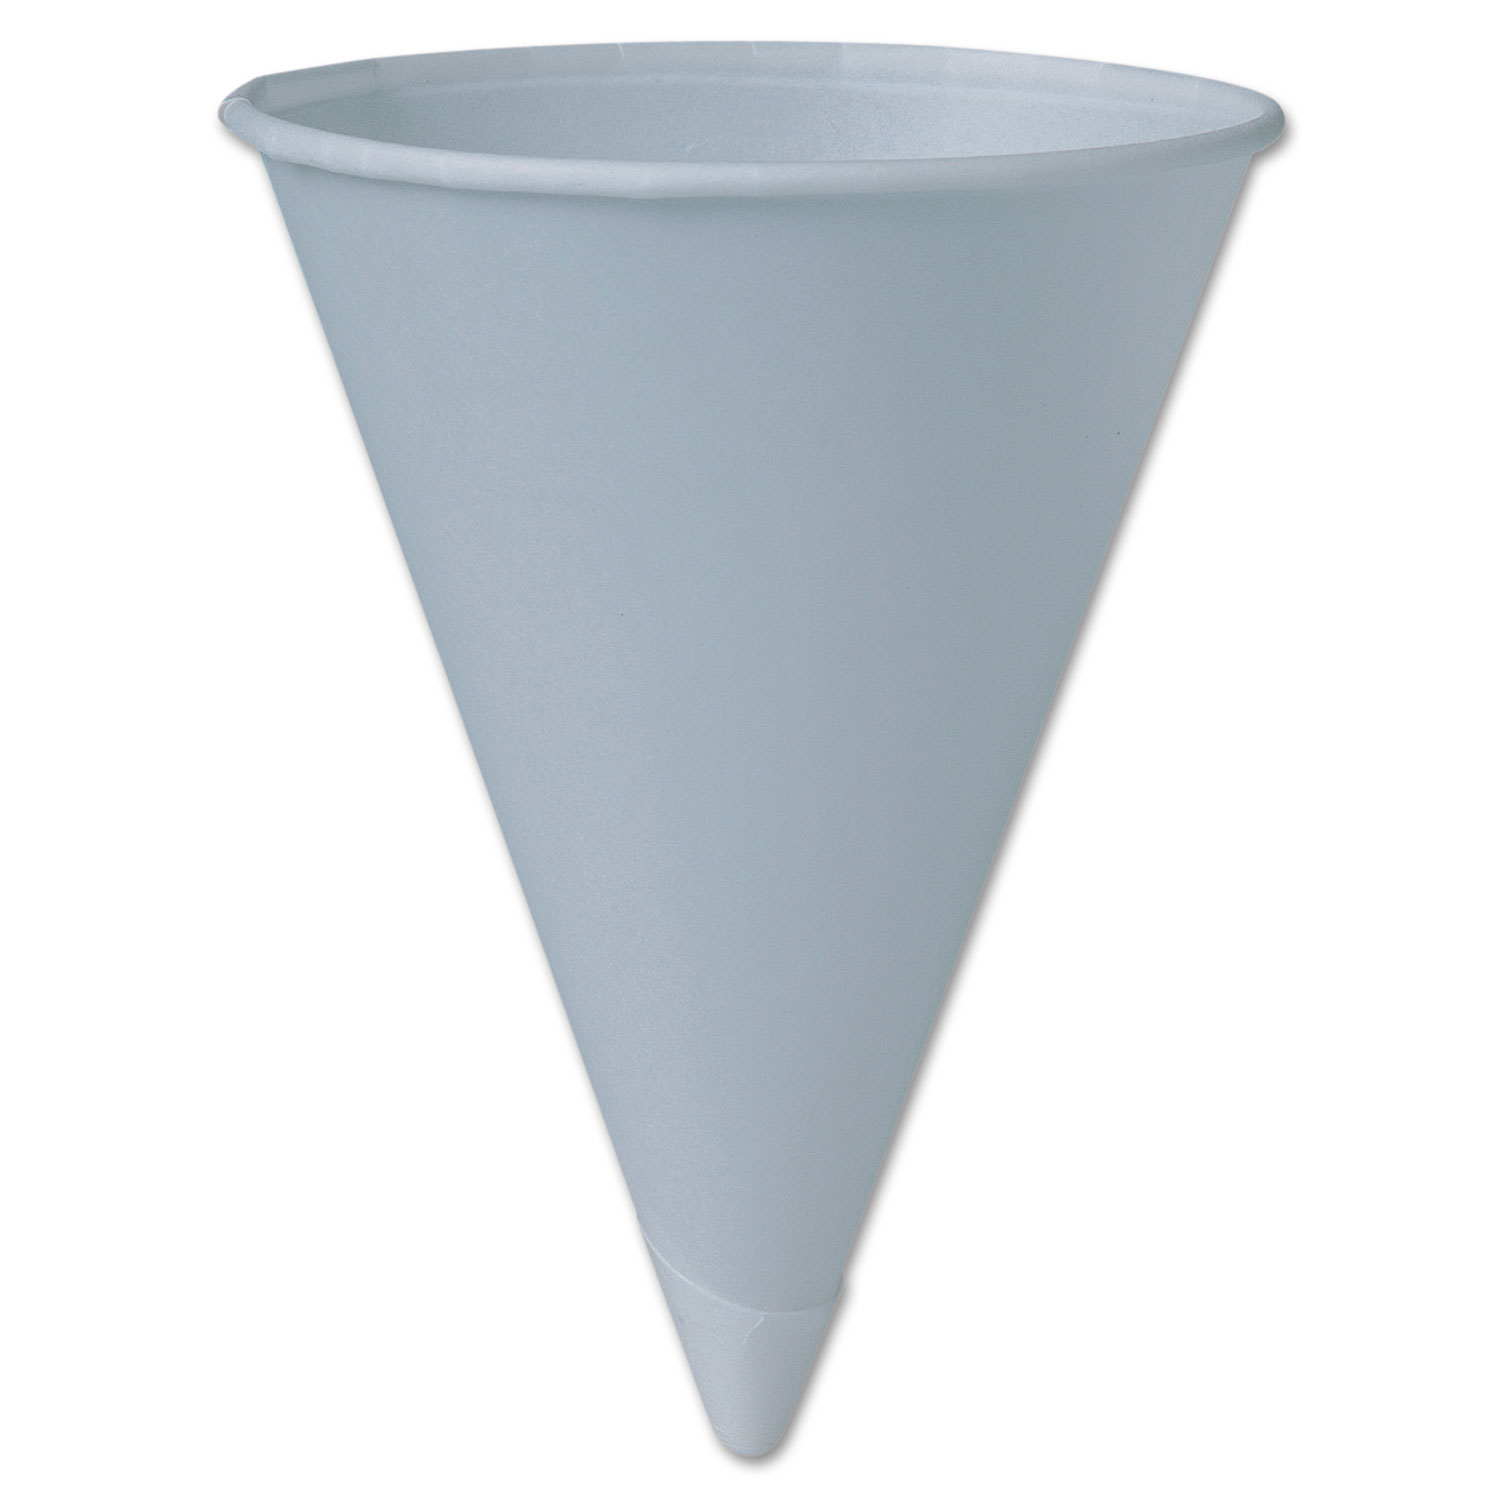  Dart 6RB-2050 Bare Treated Paper Cone Water Cups, 6 oz, White, 200/Sleeve, 25 Sleeves/Carton (SCC6RBU) 